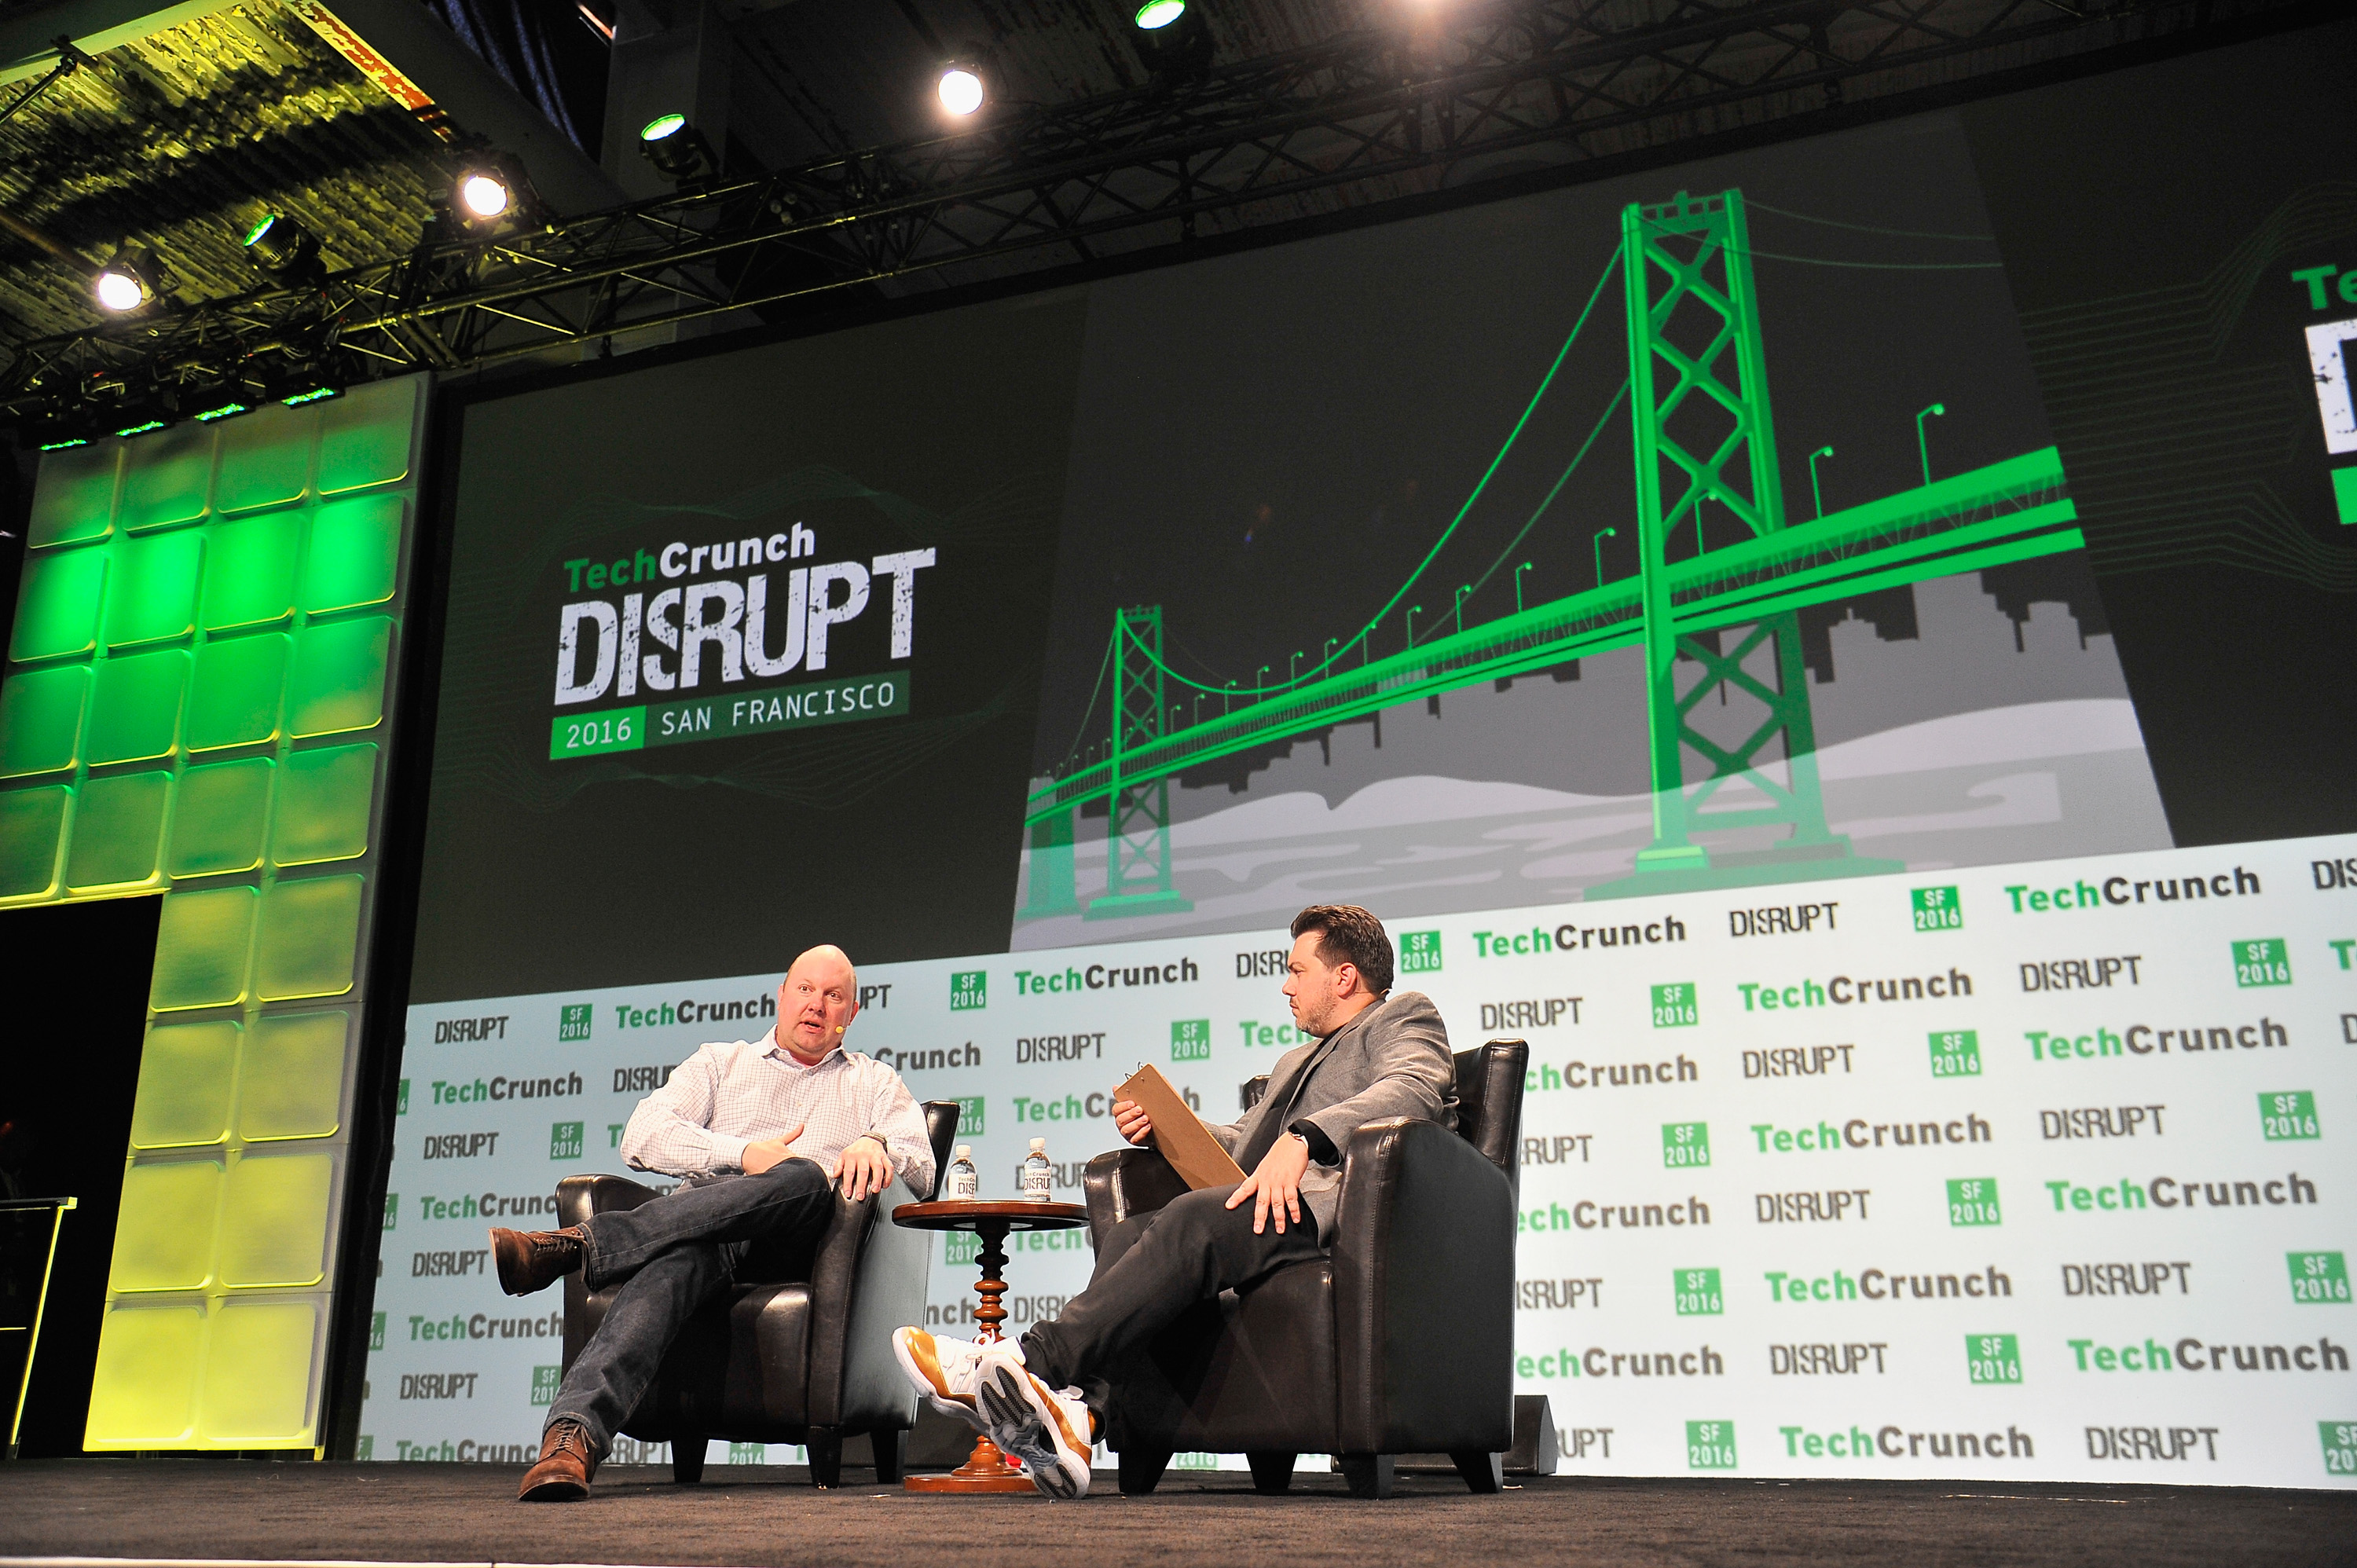 Silicon Valley entrepreneur Marc Andreessen onstage at the TechCrunch Disrupt festival in 2016.